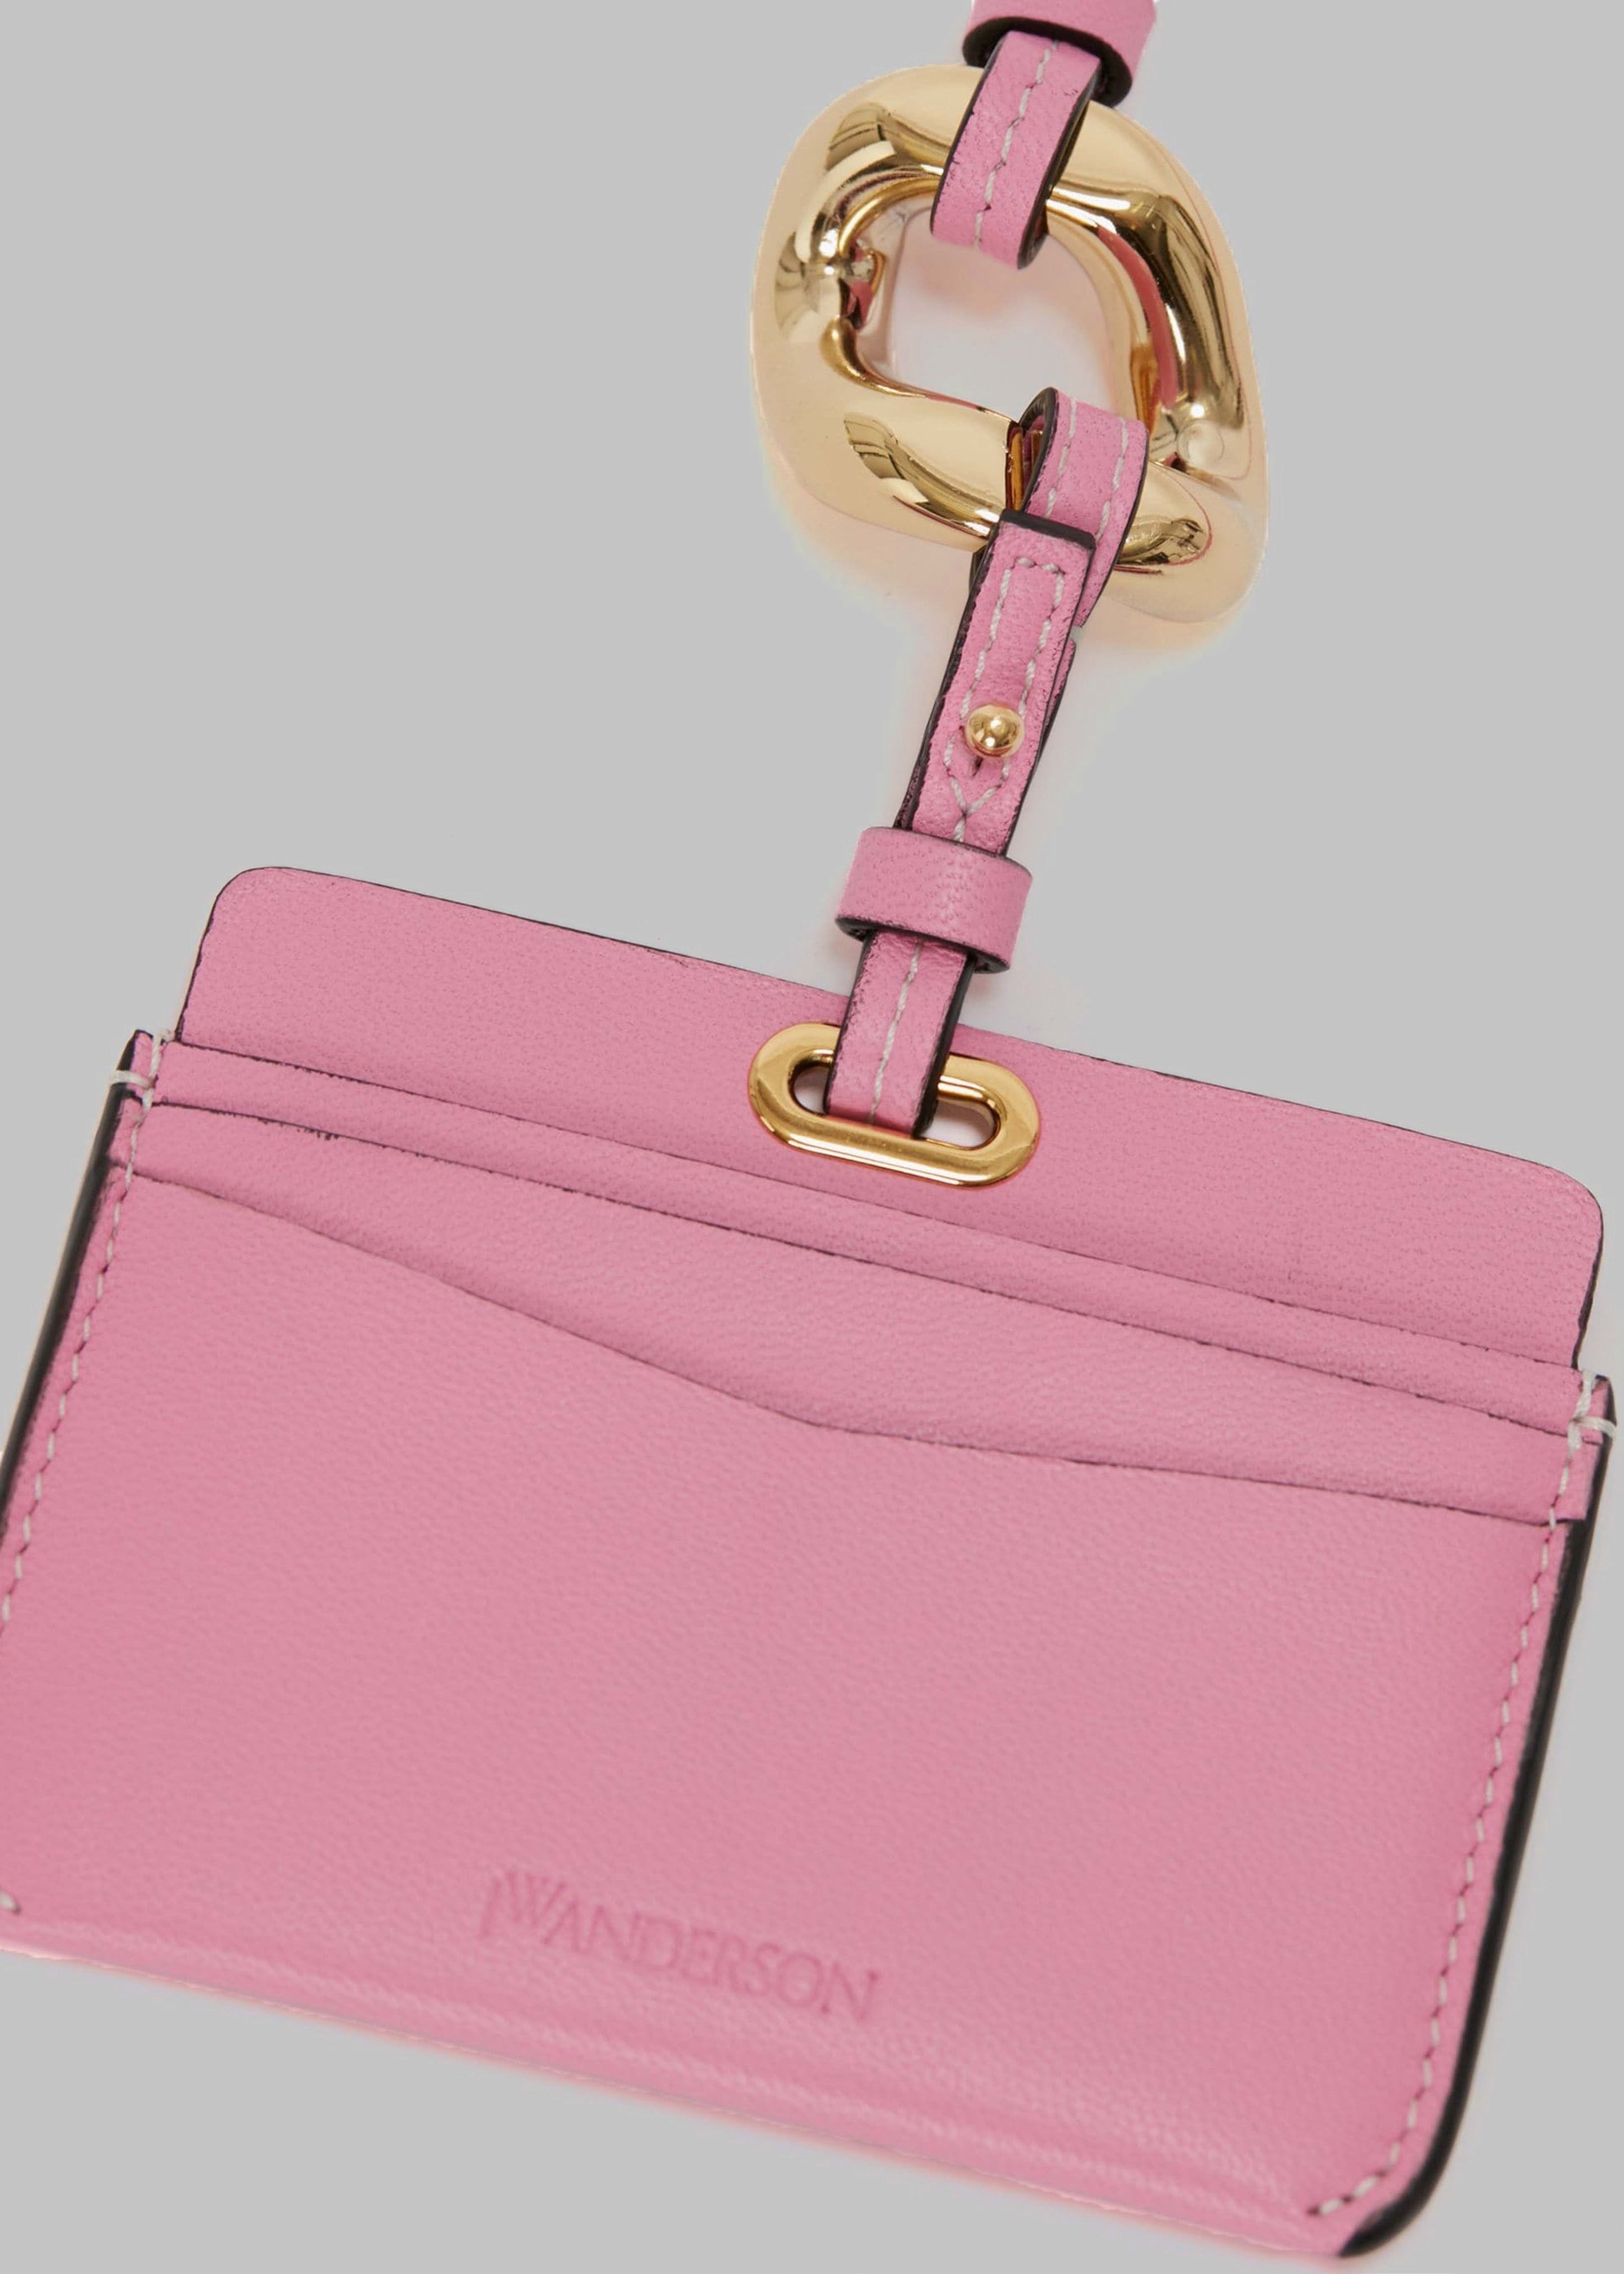 JW Anderson Cardholder with Chain Link Strap - Pink - 2